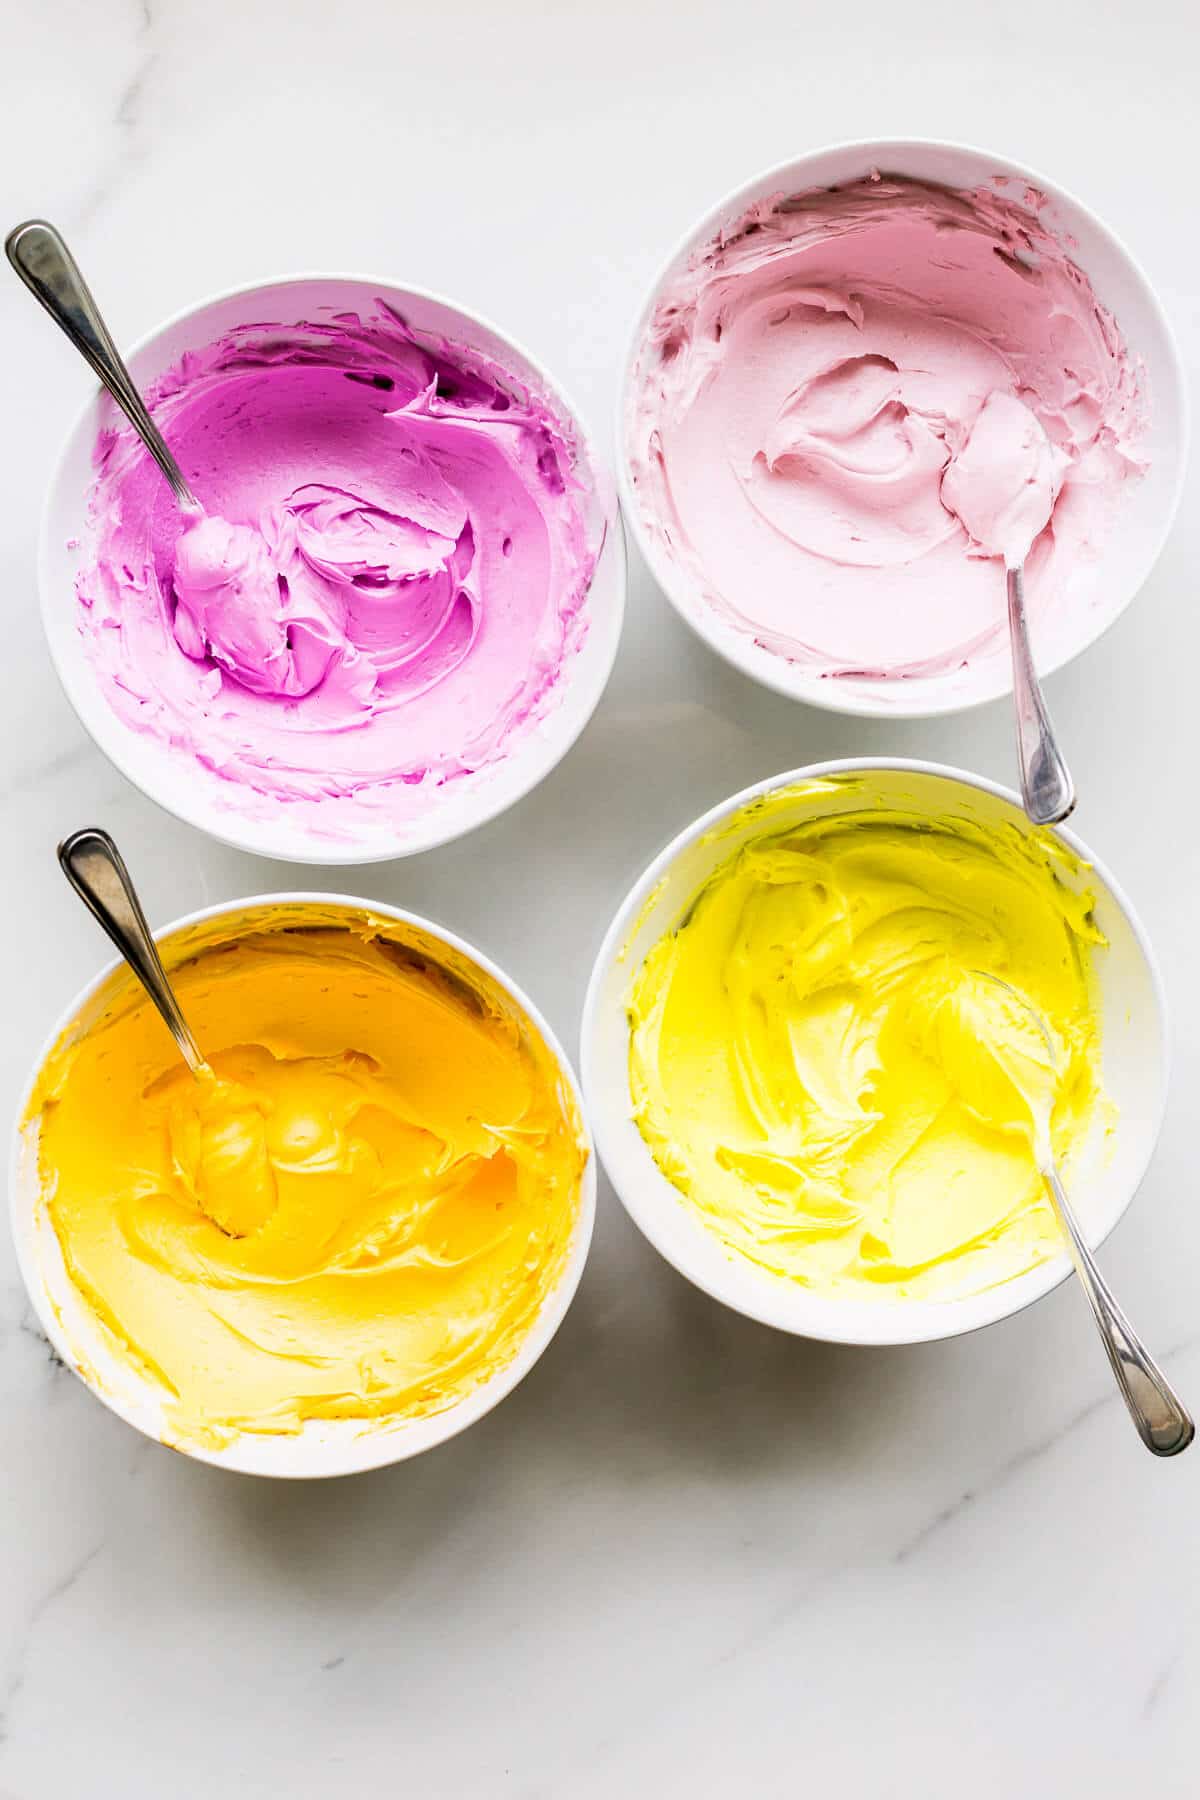 Bowls of royal icing dyed with gel colours to make homemade sprinkles.